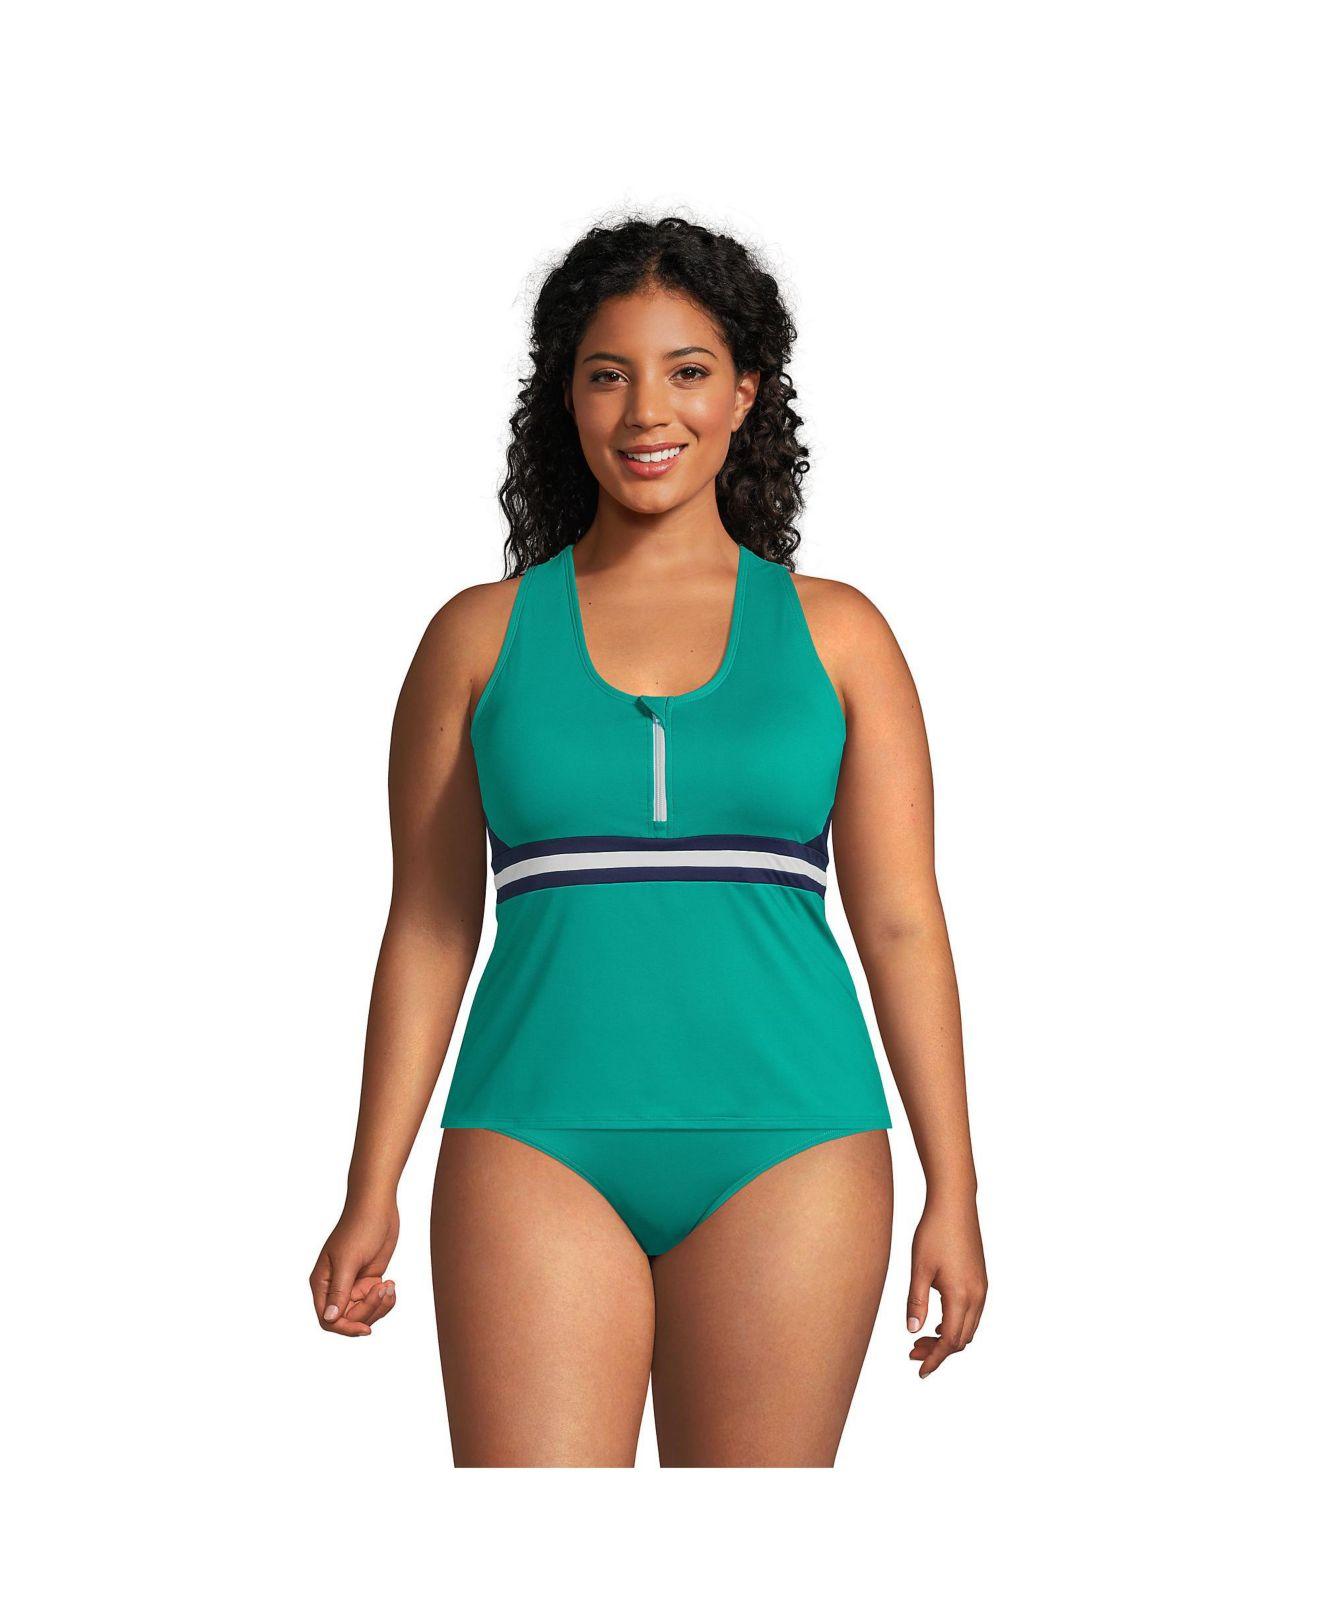 labyrint foran by Lands' End Plus Size Zip Front Tankini Swimsuit Top in Green | Lyst